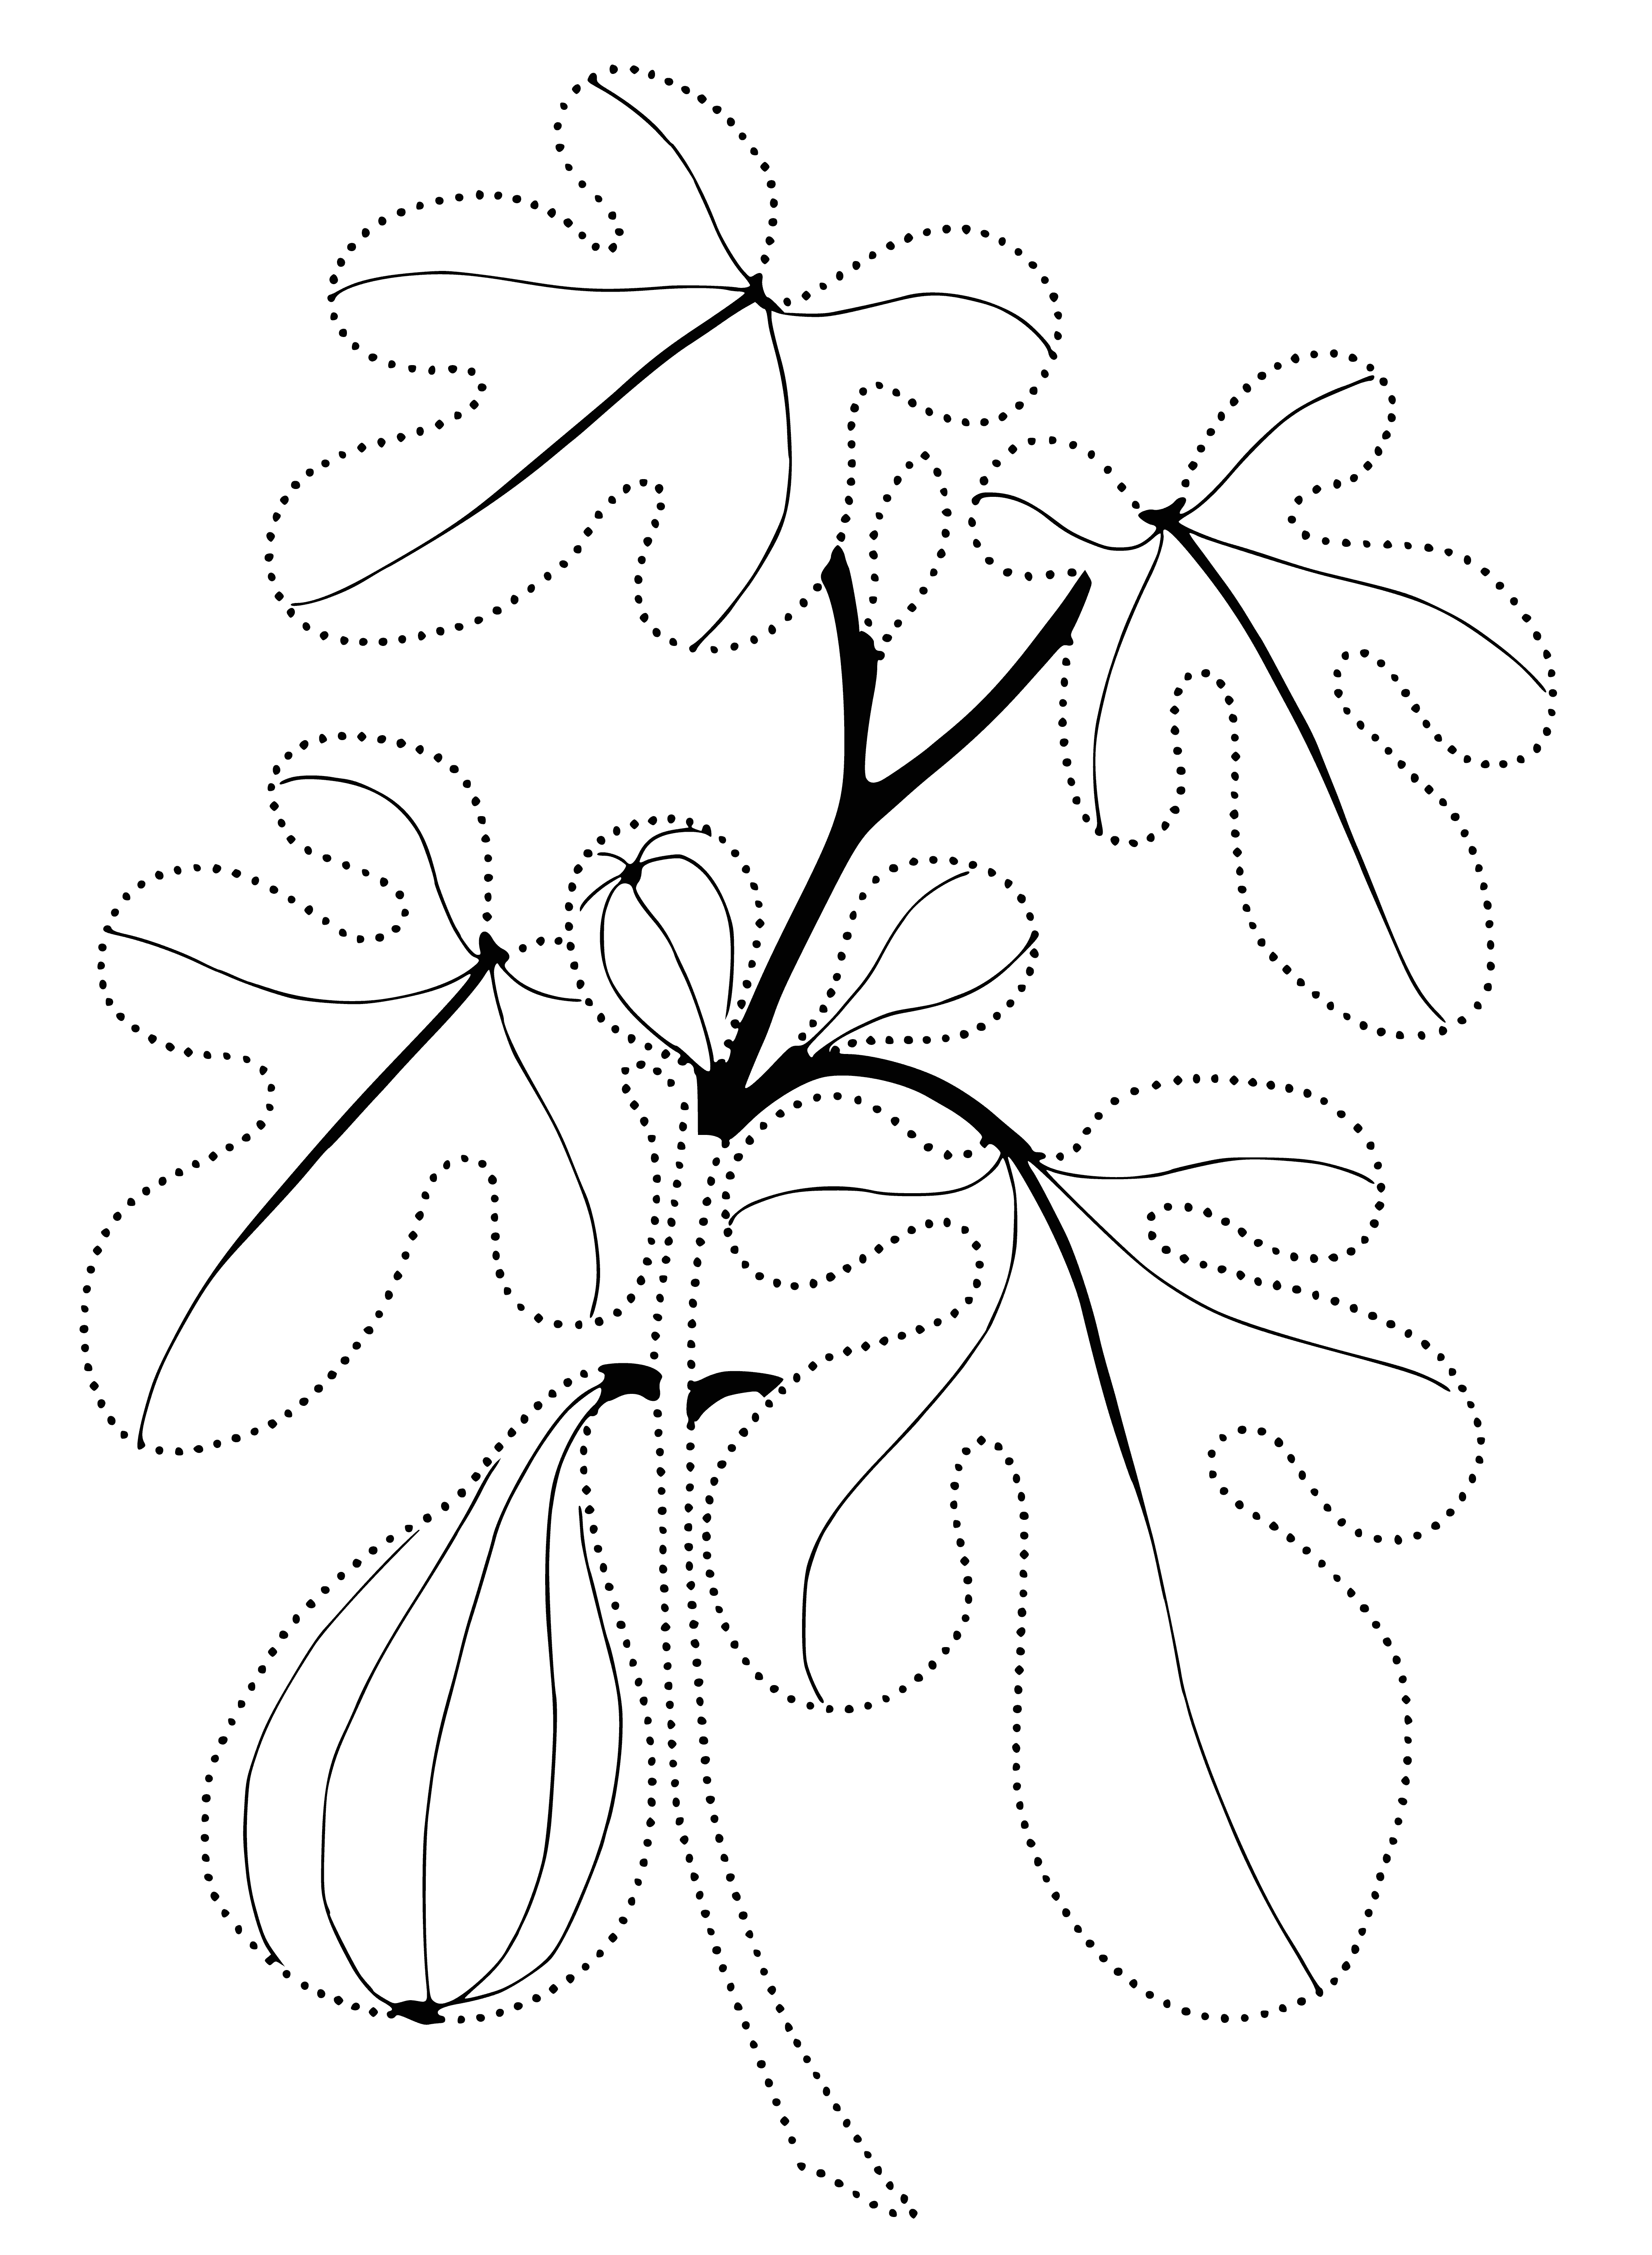 coloring page: A fig is a soft, sticky fruit that grows on trees in warm climates and is filled with small seeds.